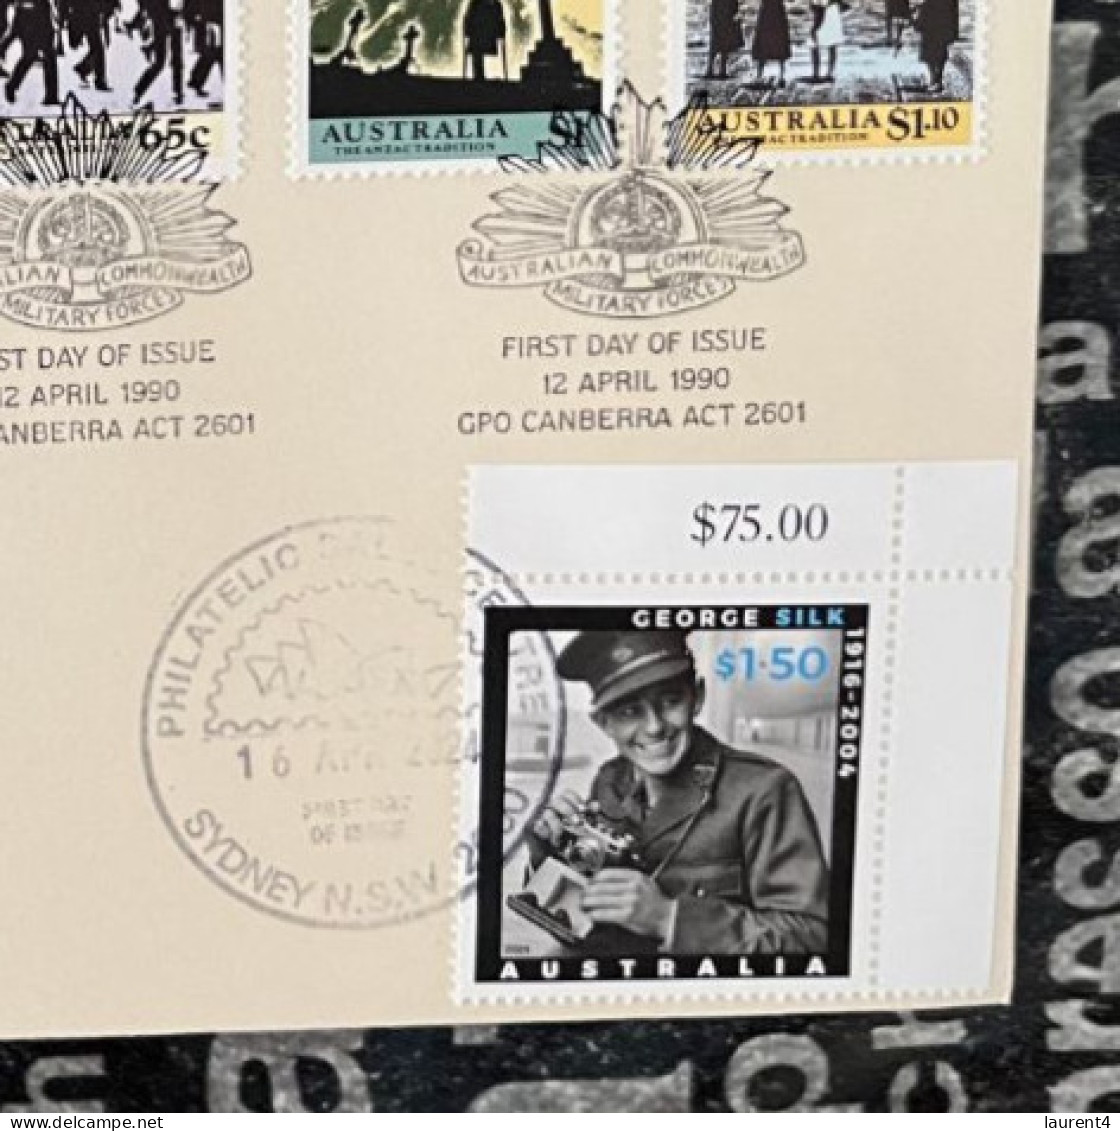 16-4-2024 (4 X 22) Australia ANZAC 2024 - New Stamp Issued 16-4-2024 (on 1990 Over-printed Cover) - Sobre Primer Día (FDC)